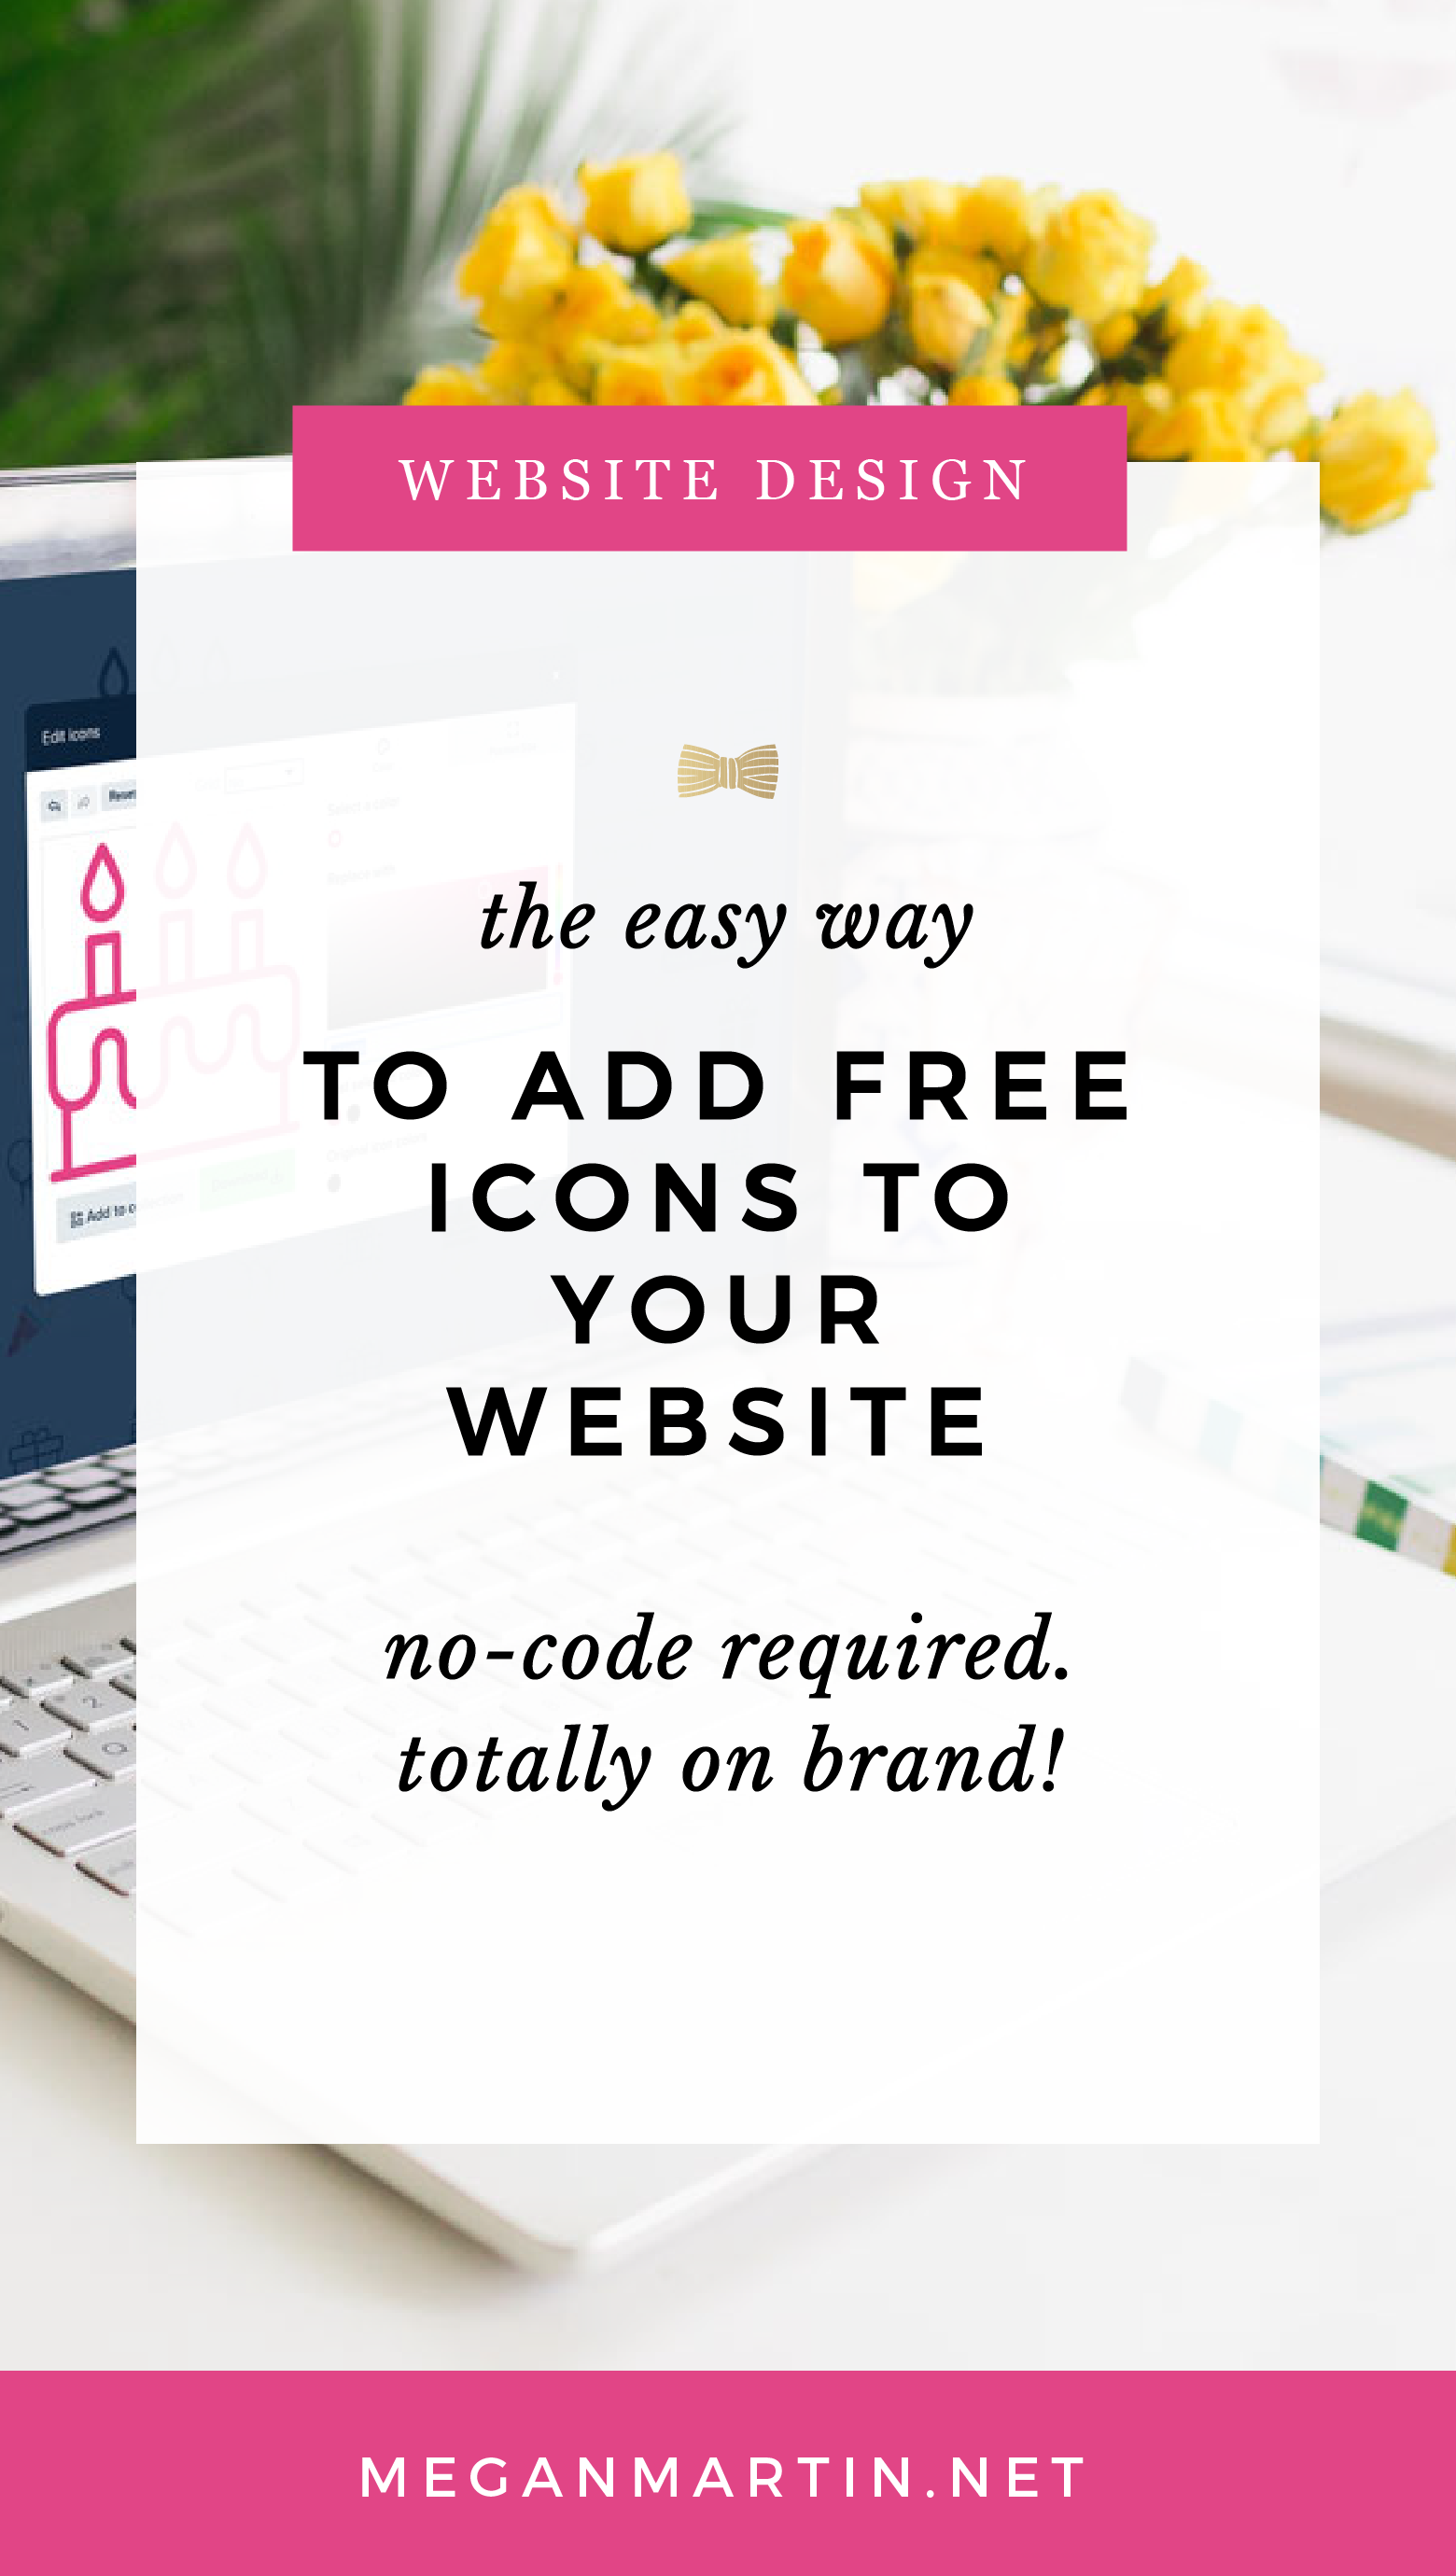 Learn to how add free icons to your website with this no-code needed tutorial! Using my favorite vector-based icon tool, Flaticon